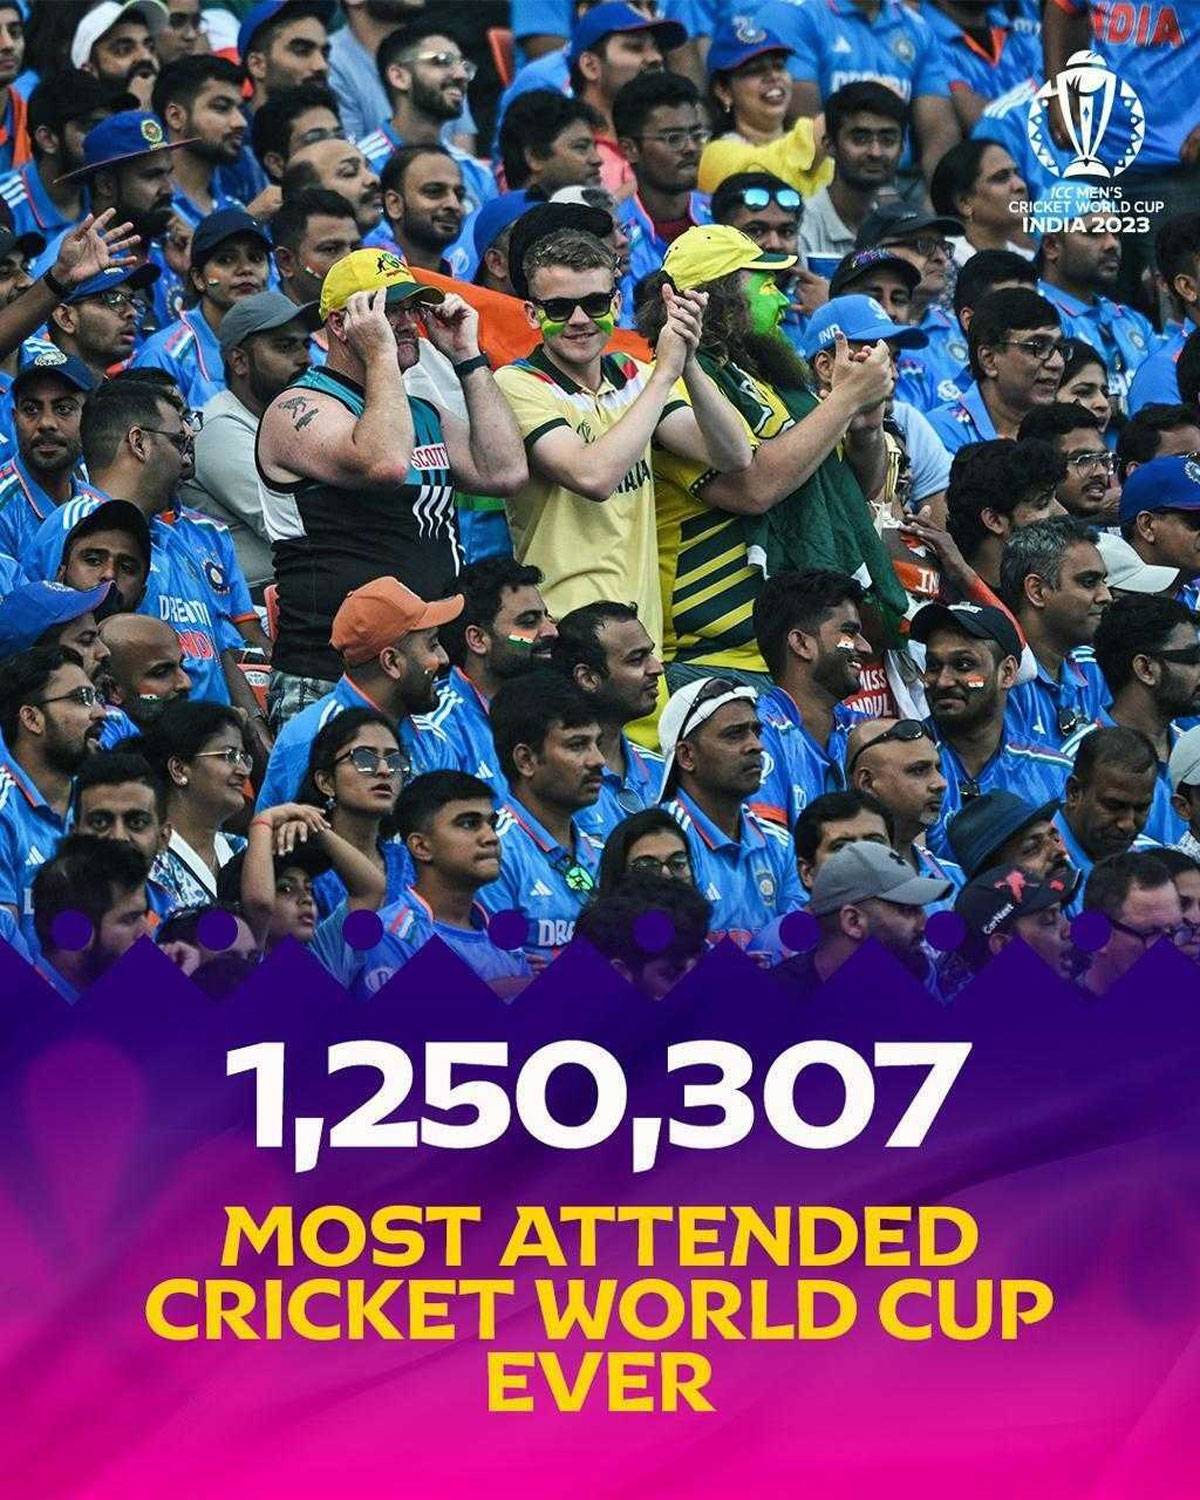 Most spectators at the 2023 Cricket World Cup